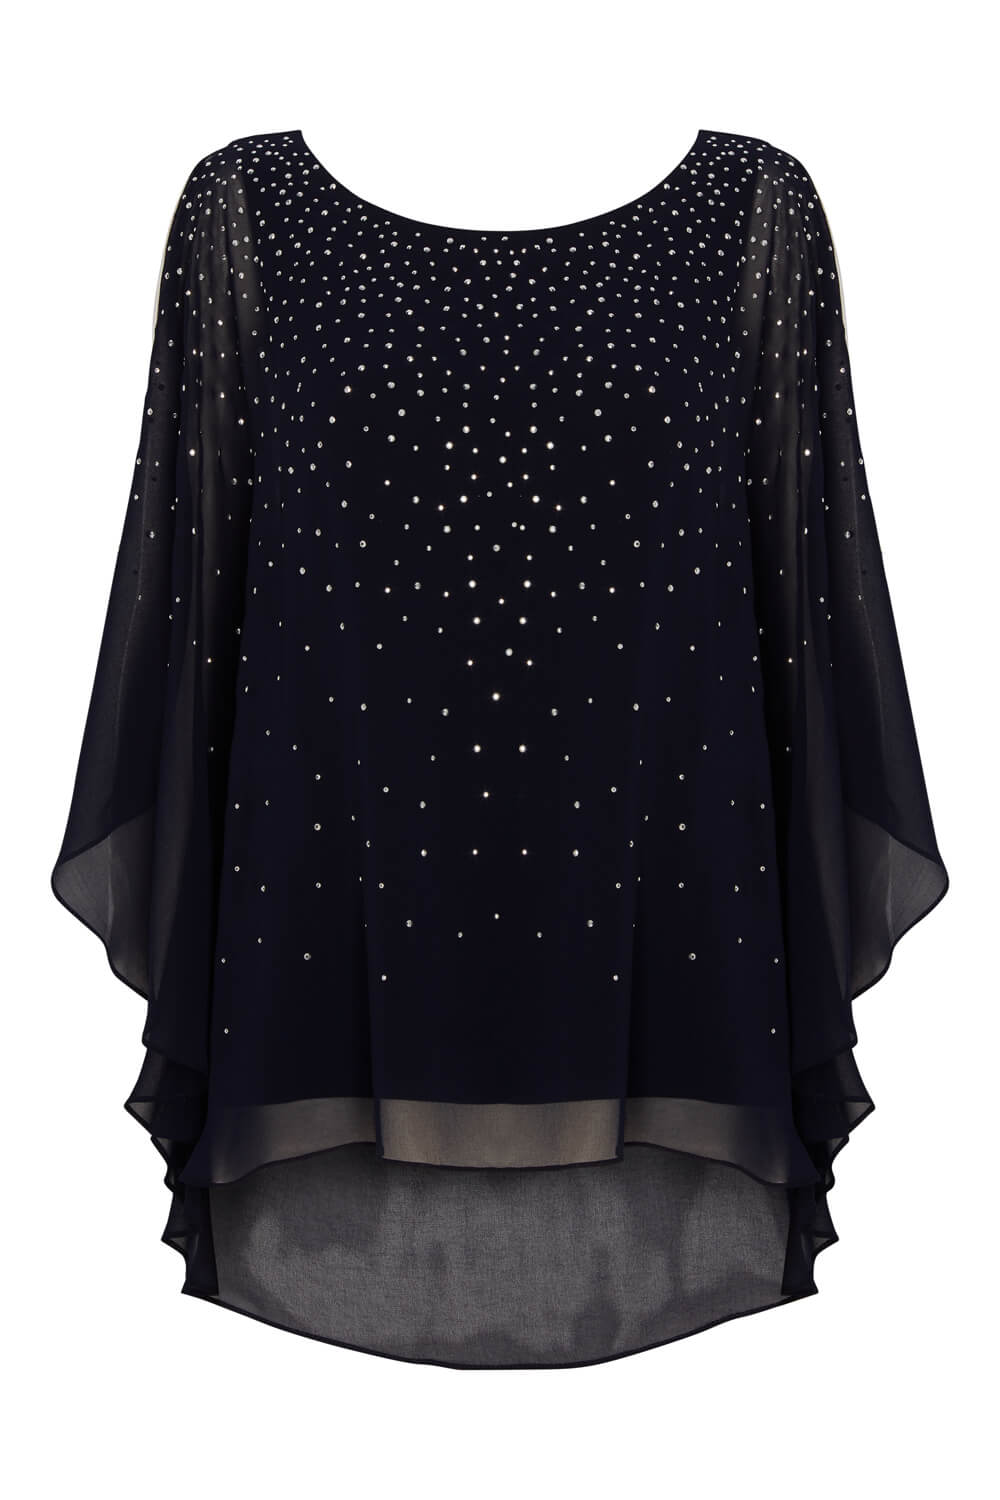 Navy  Sparkly Chiffon Overlay Top, Image 2 of 4